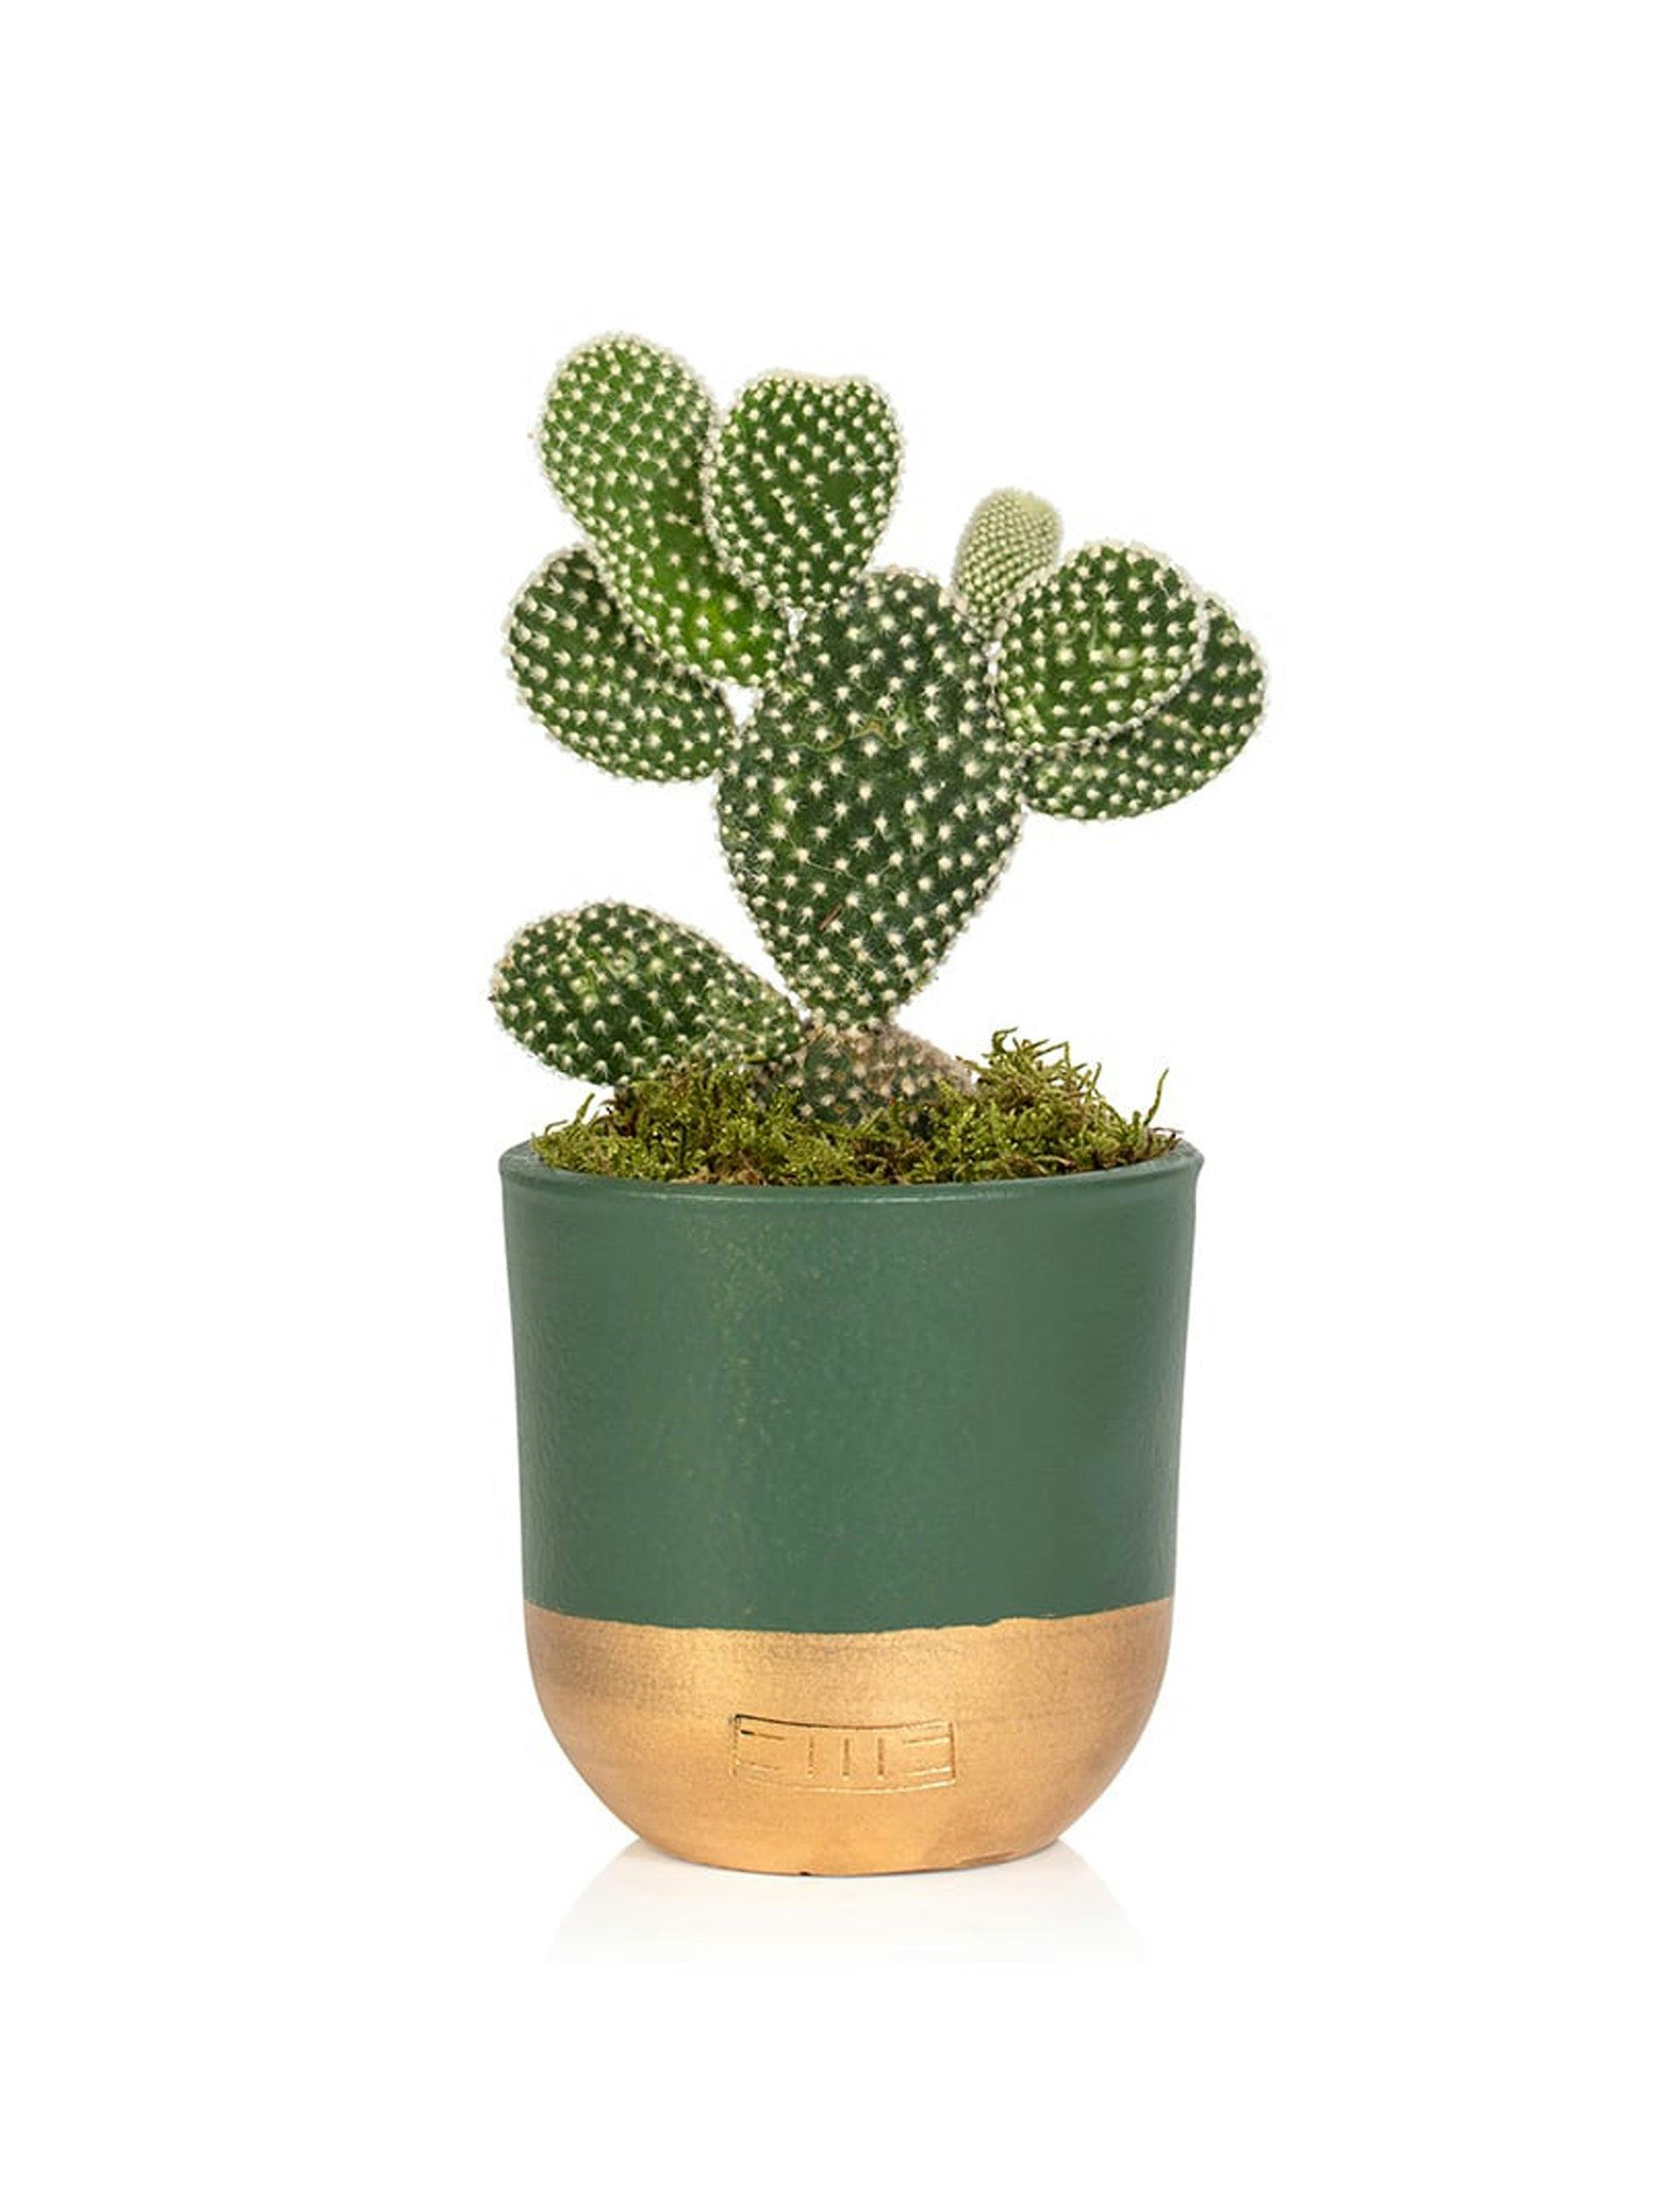 Green and gold potted cactus plant